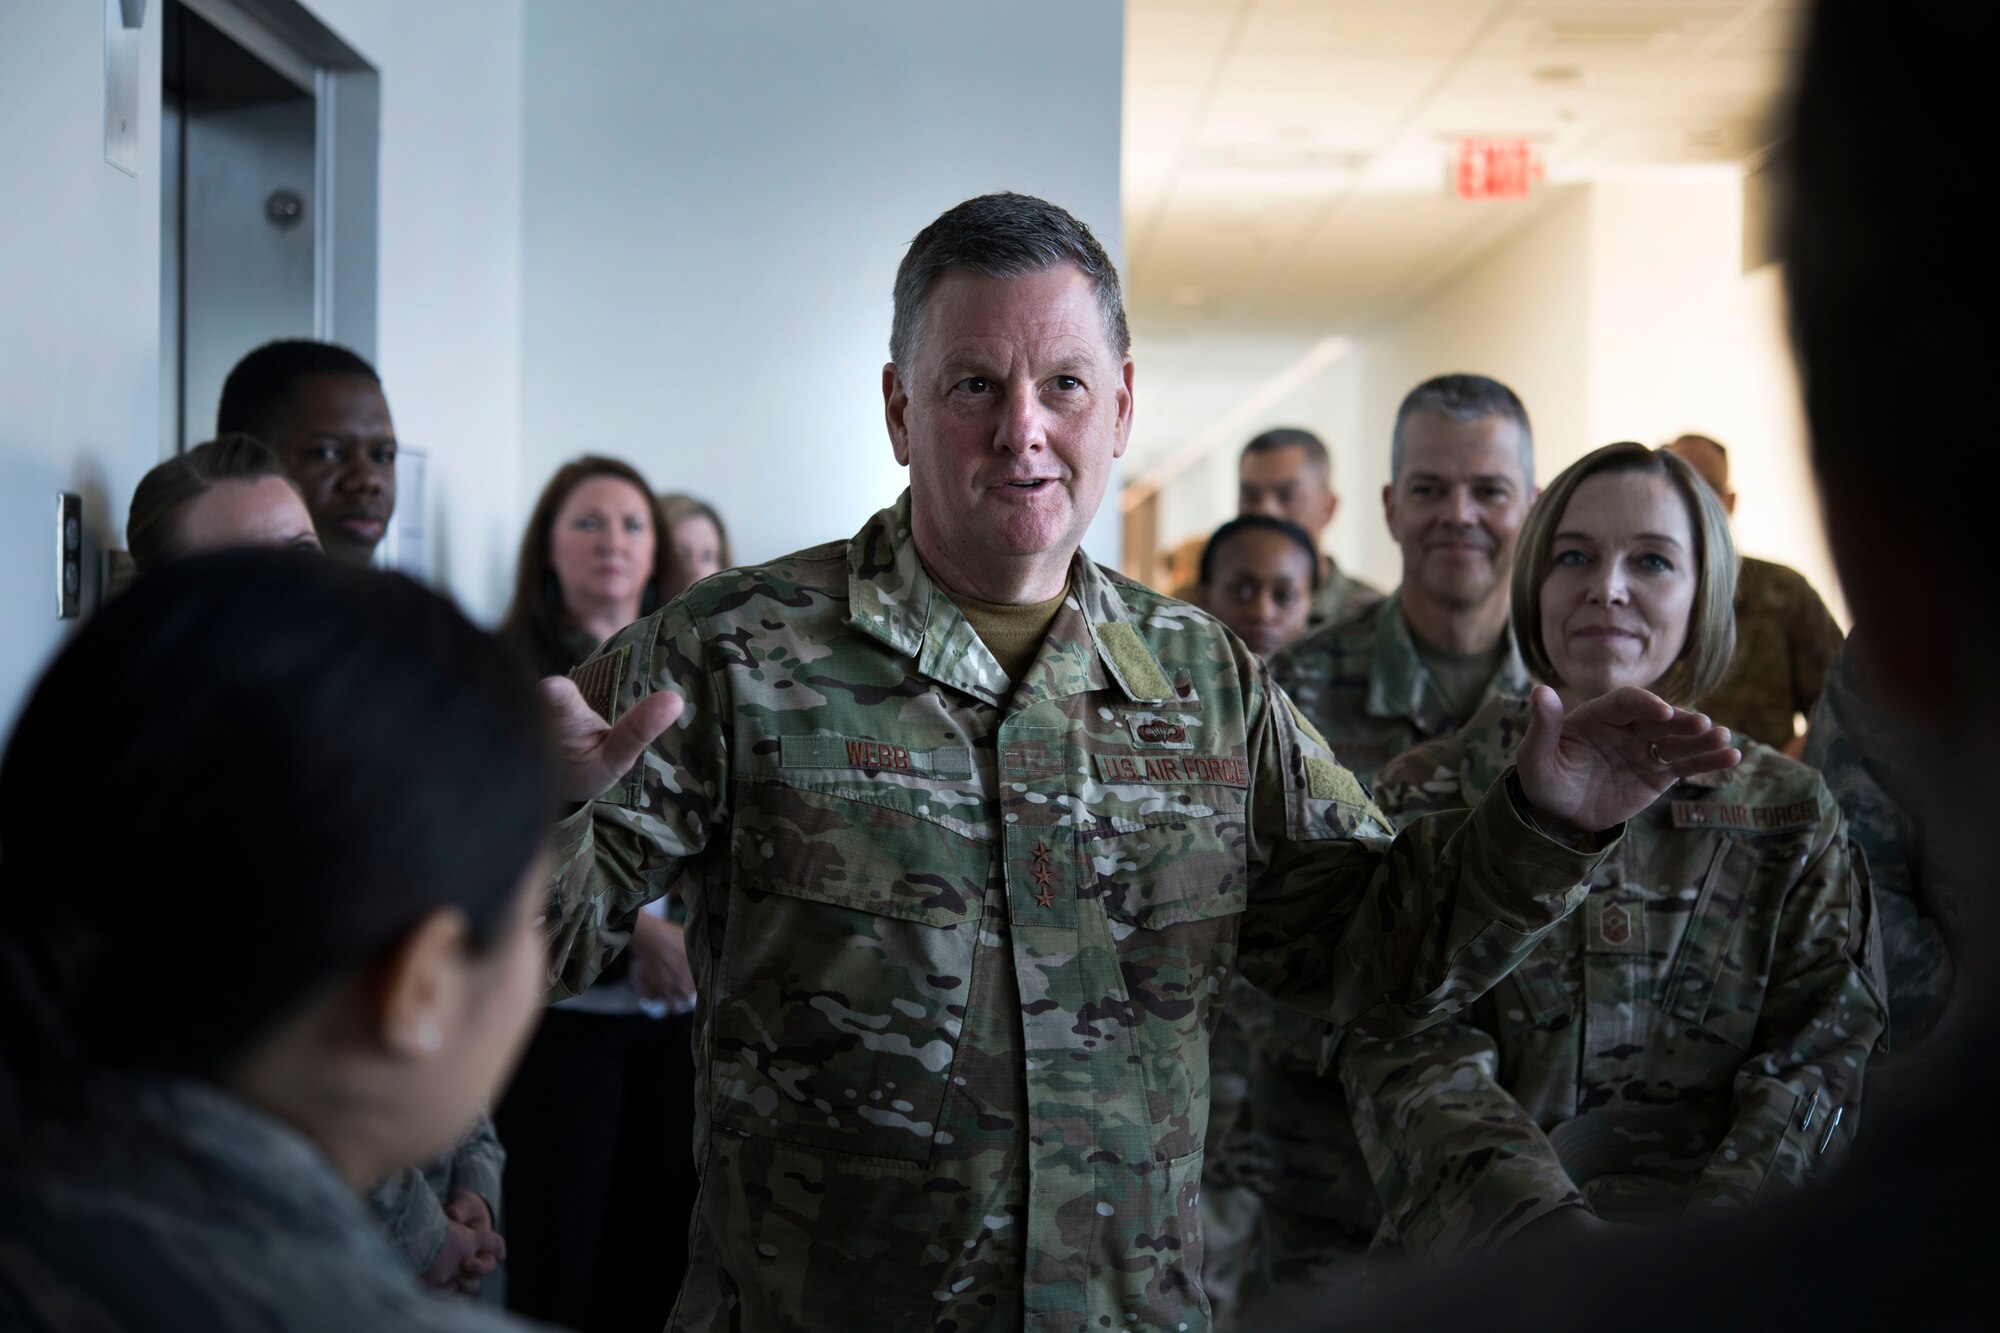 AETC leadership visits the 59th Medical Wing